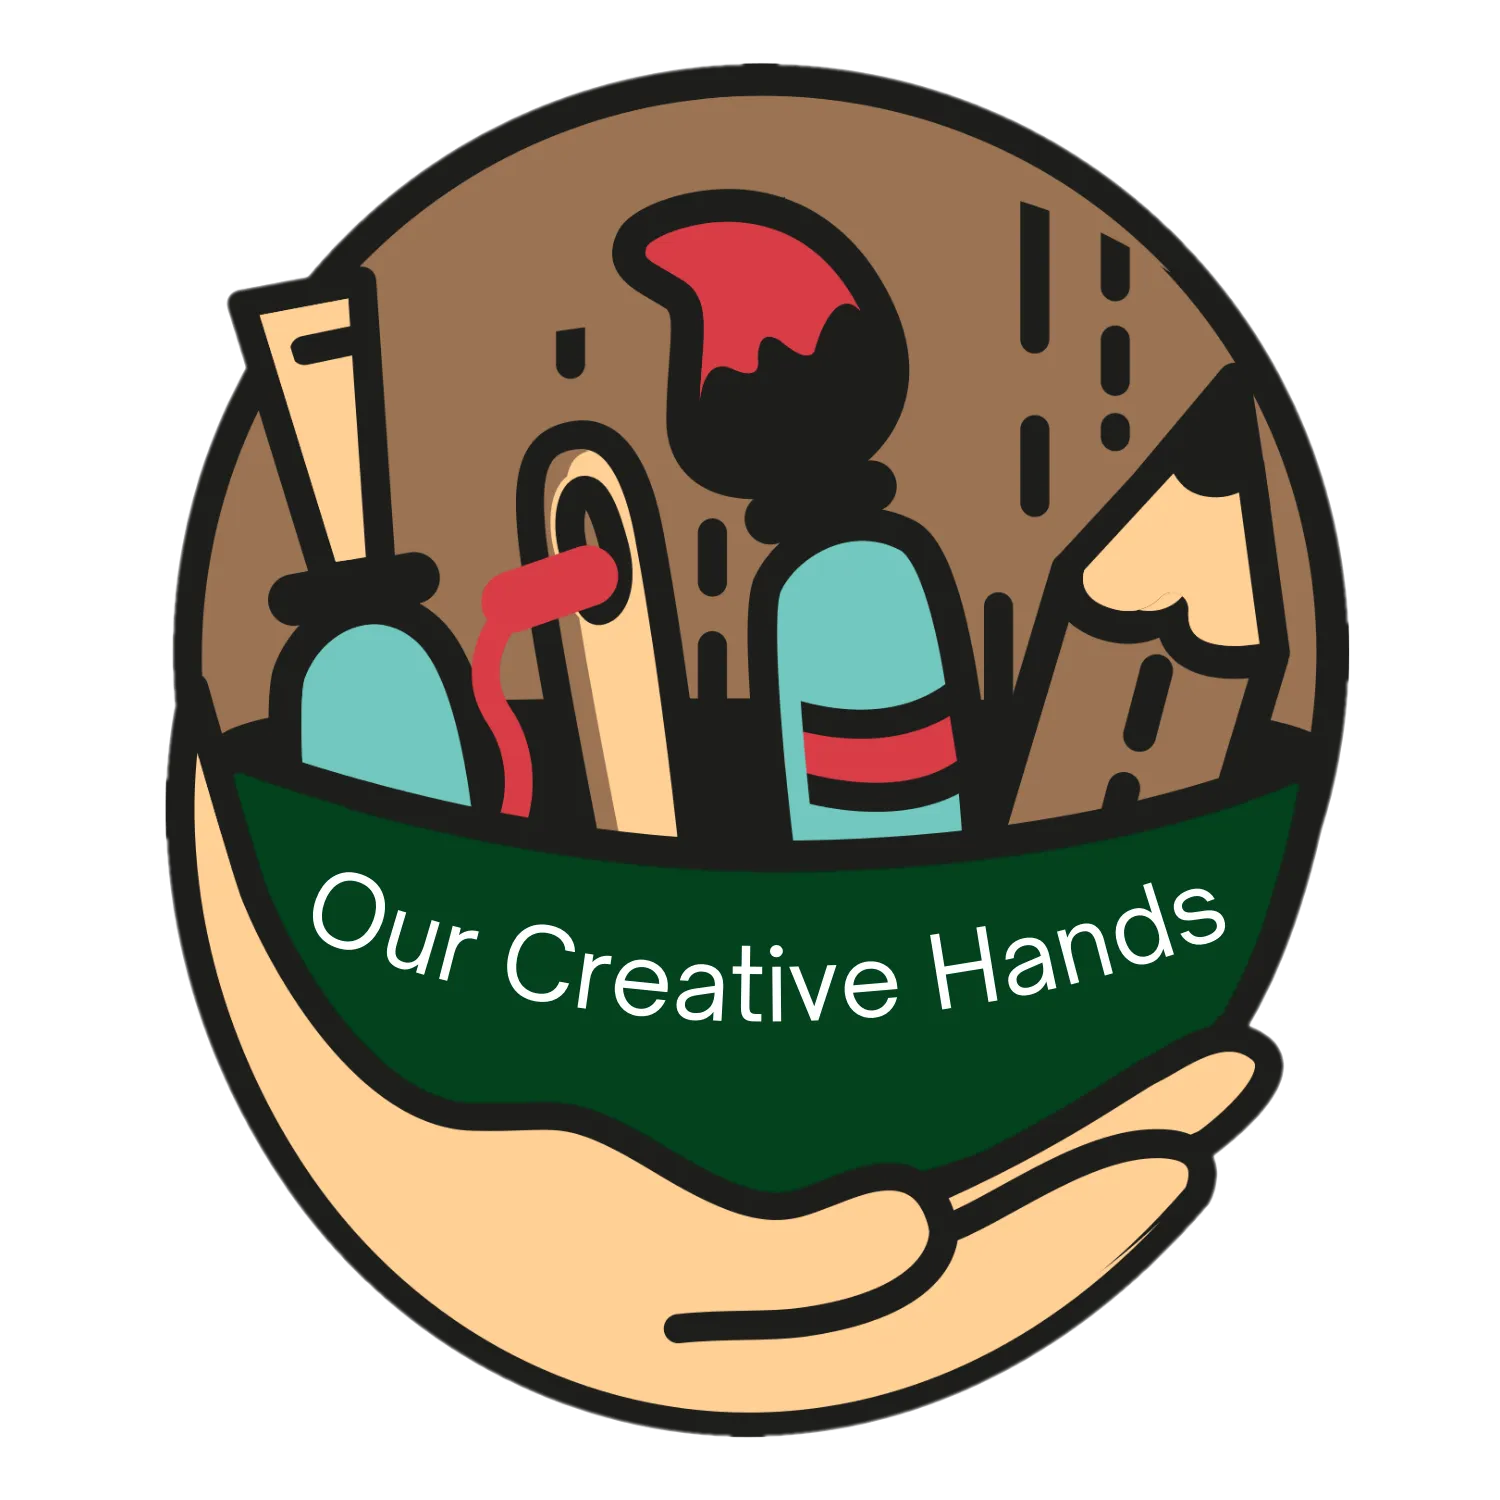 Our Creative Hands